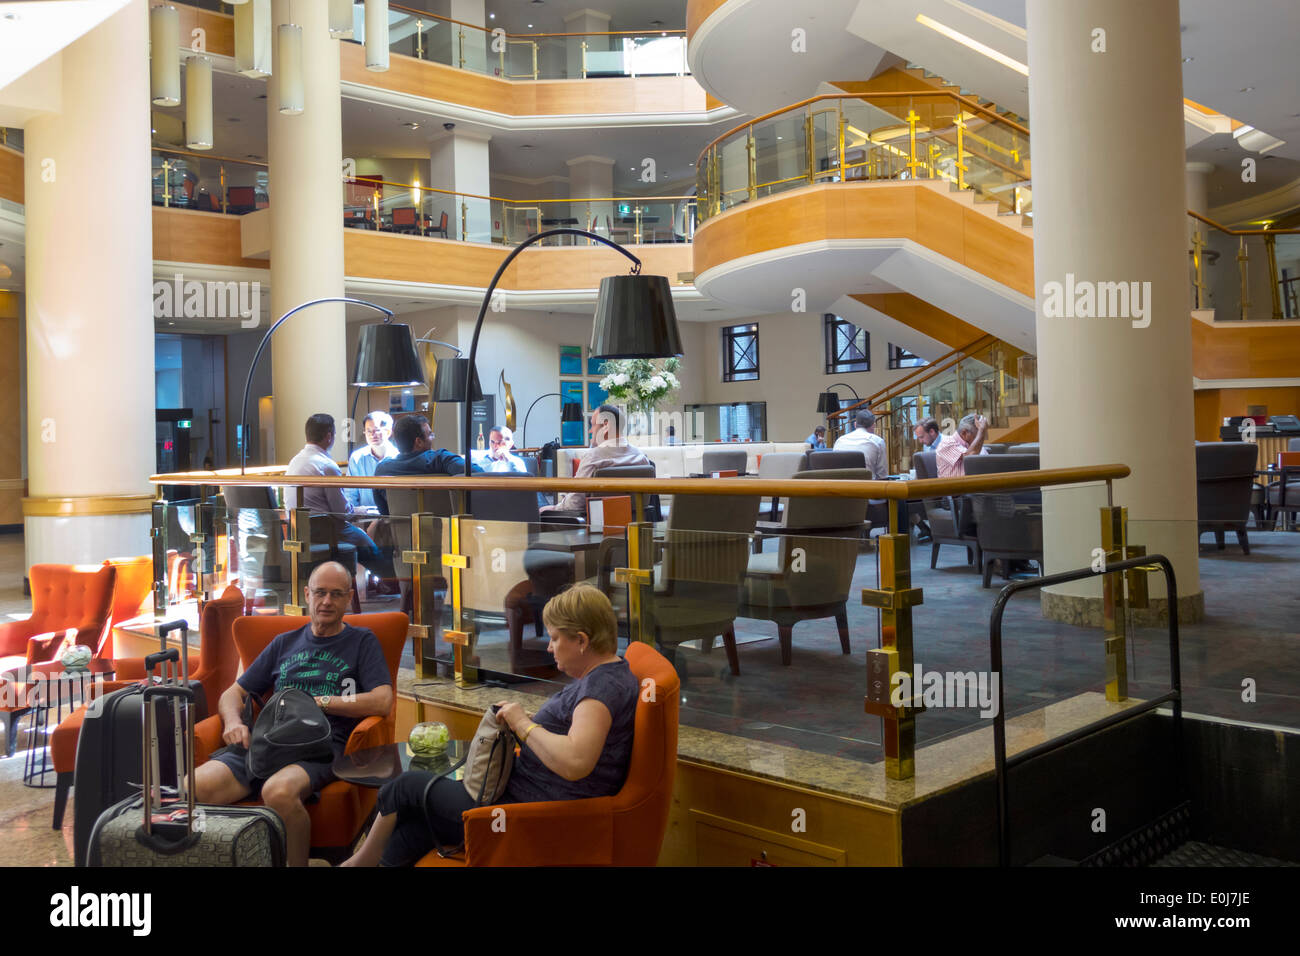 Sydney Australia,Marriott Sydney Harbour,harbor,lobby,interior inside,stairs,staircase,guests,AU140310023 Stock Photo